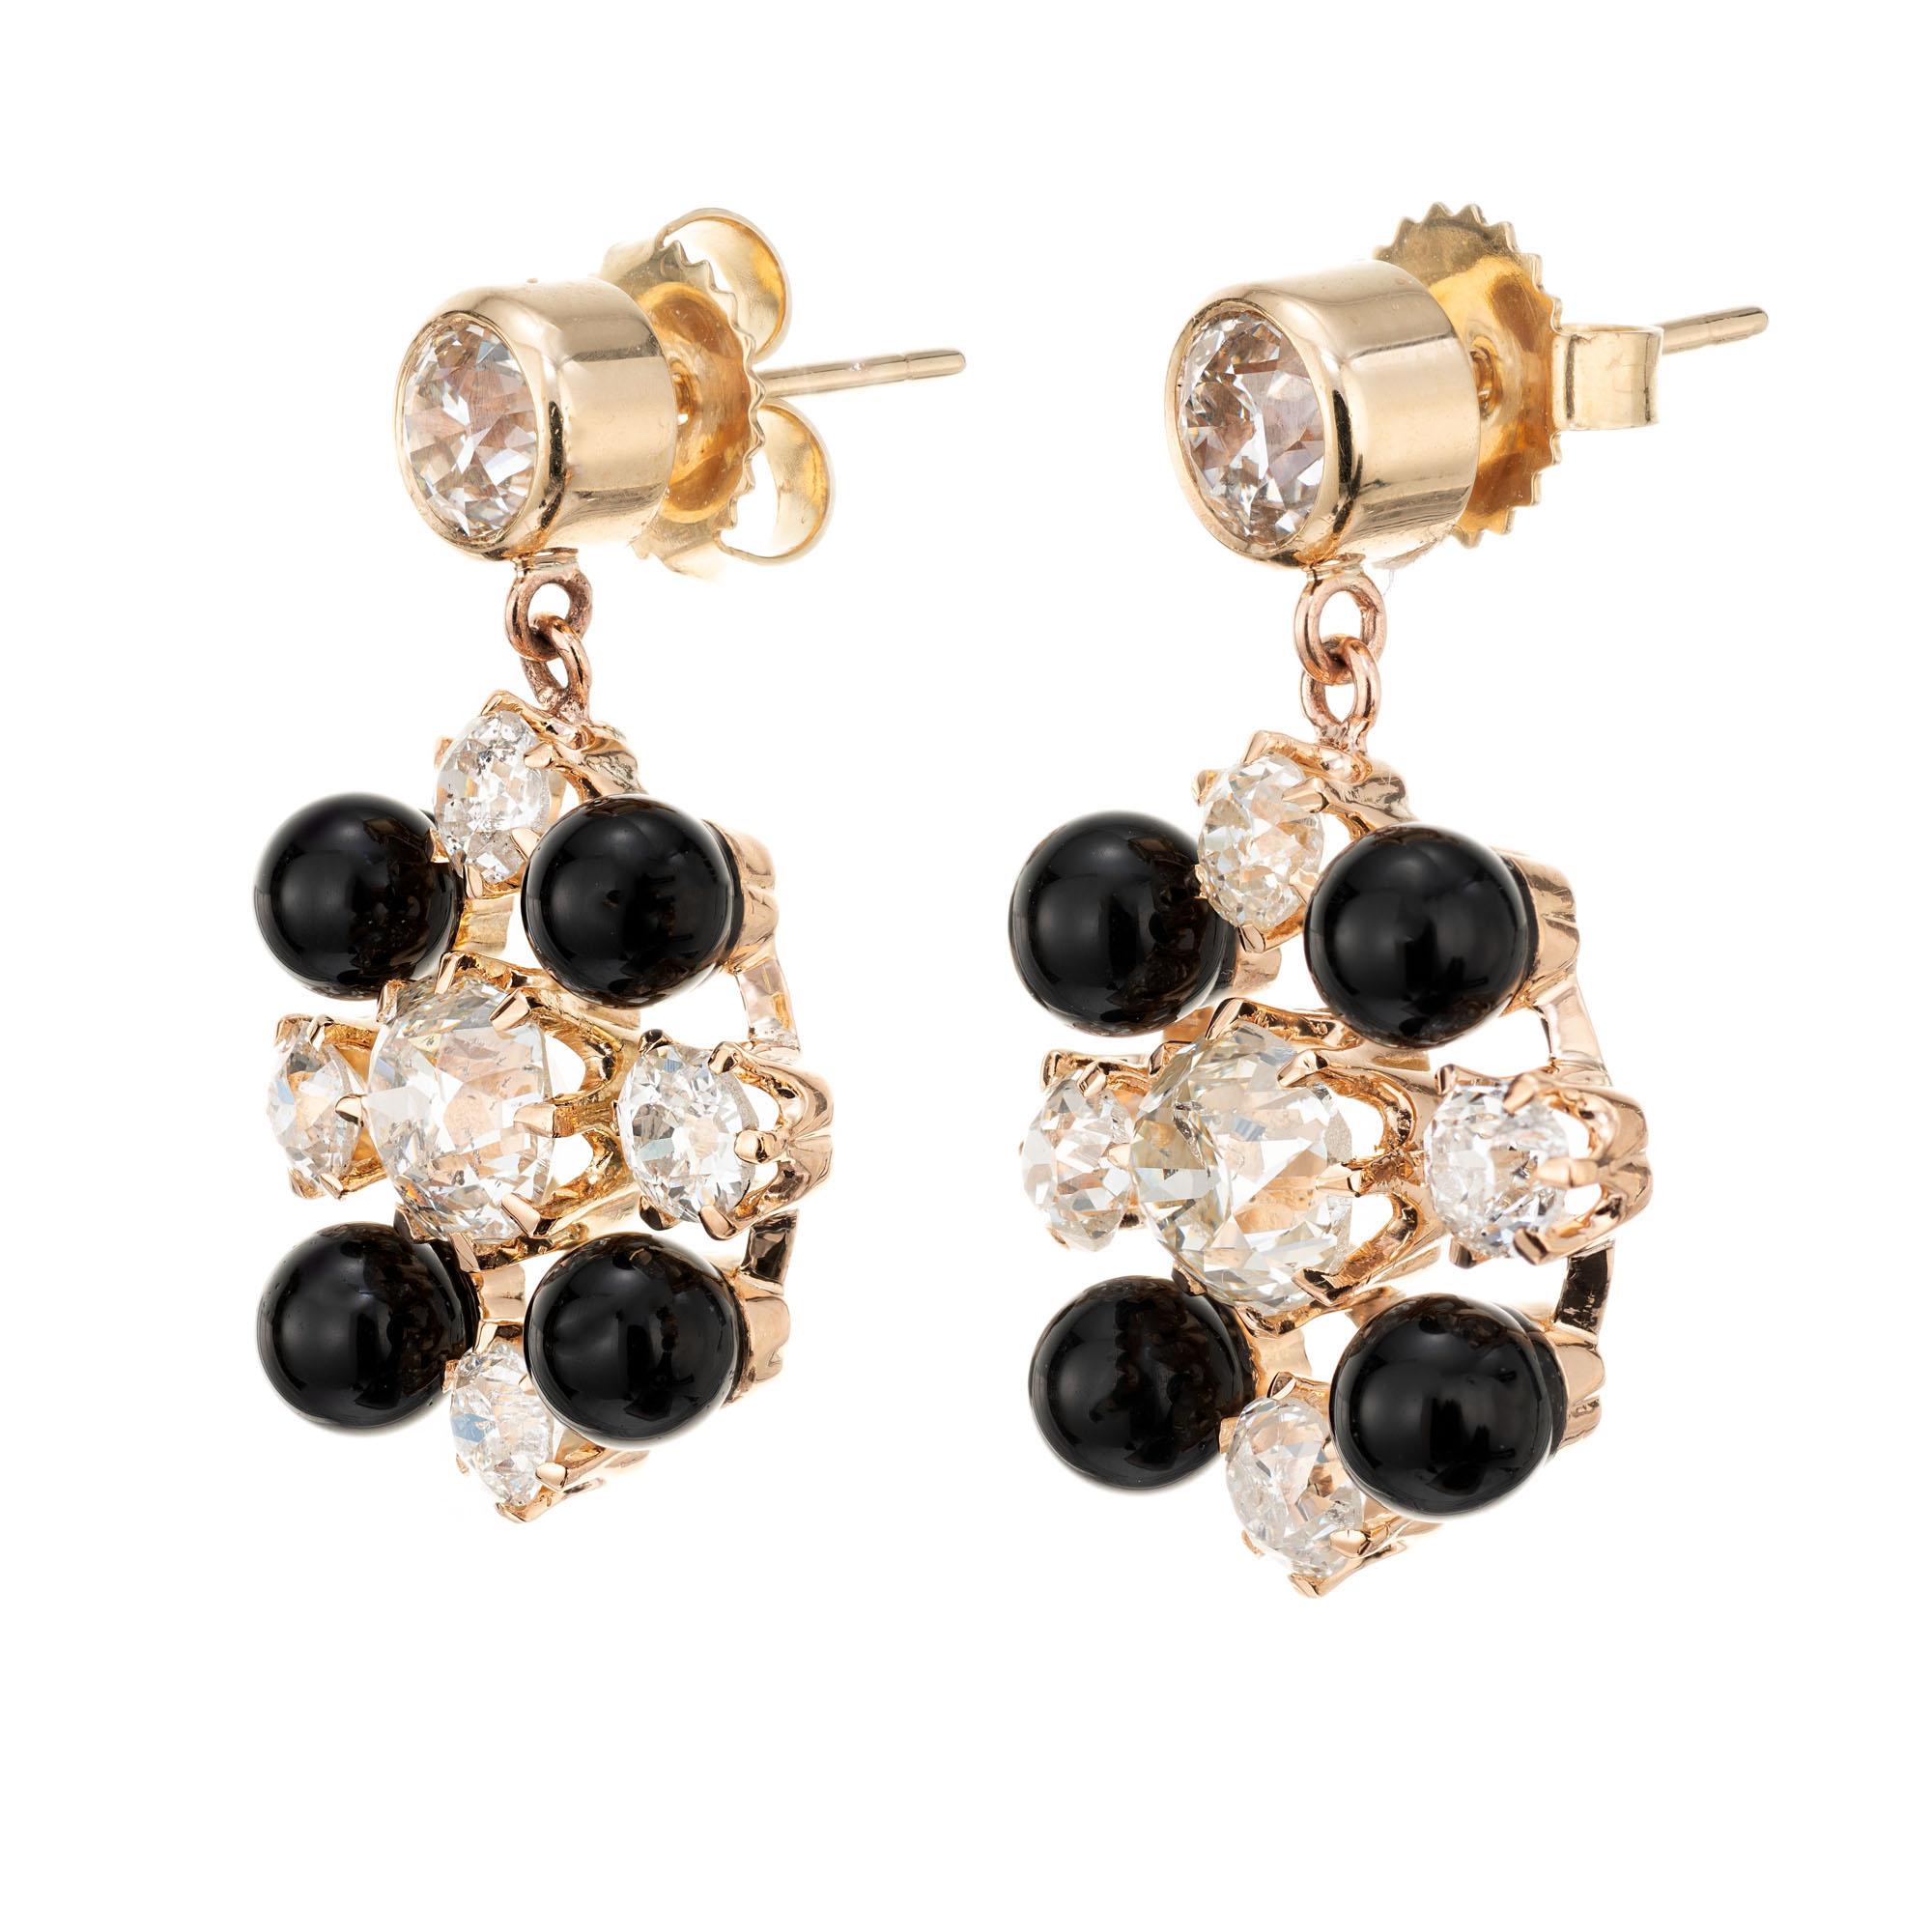 1890's Victorian Diamond and onyx dangle earrings. 14k rose gold settings with 8 round black onyx and 12 Old European brilliant cut diamonds. The two largest (center) diamonds are EGL certified.  Top diamonds are bezel set in 14k yellow gold. Dangle